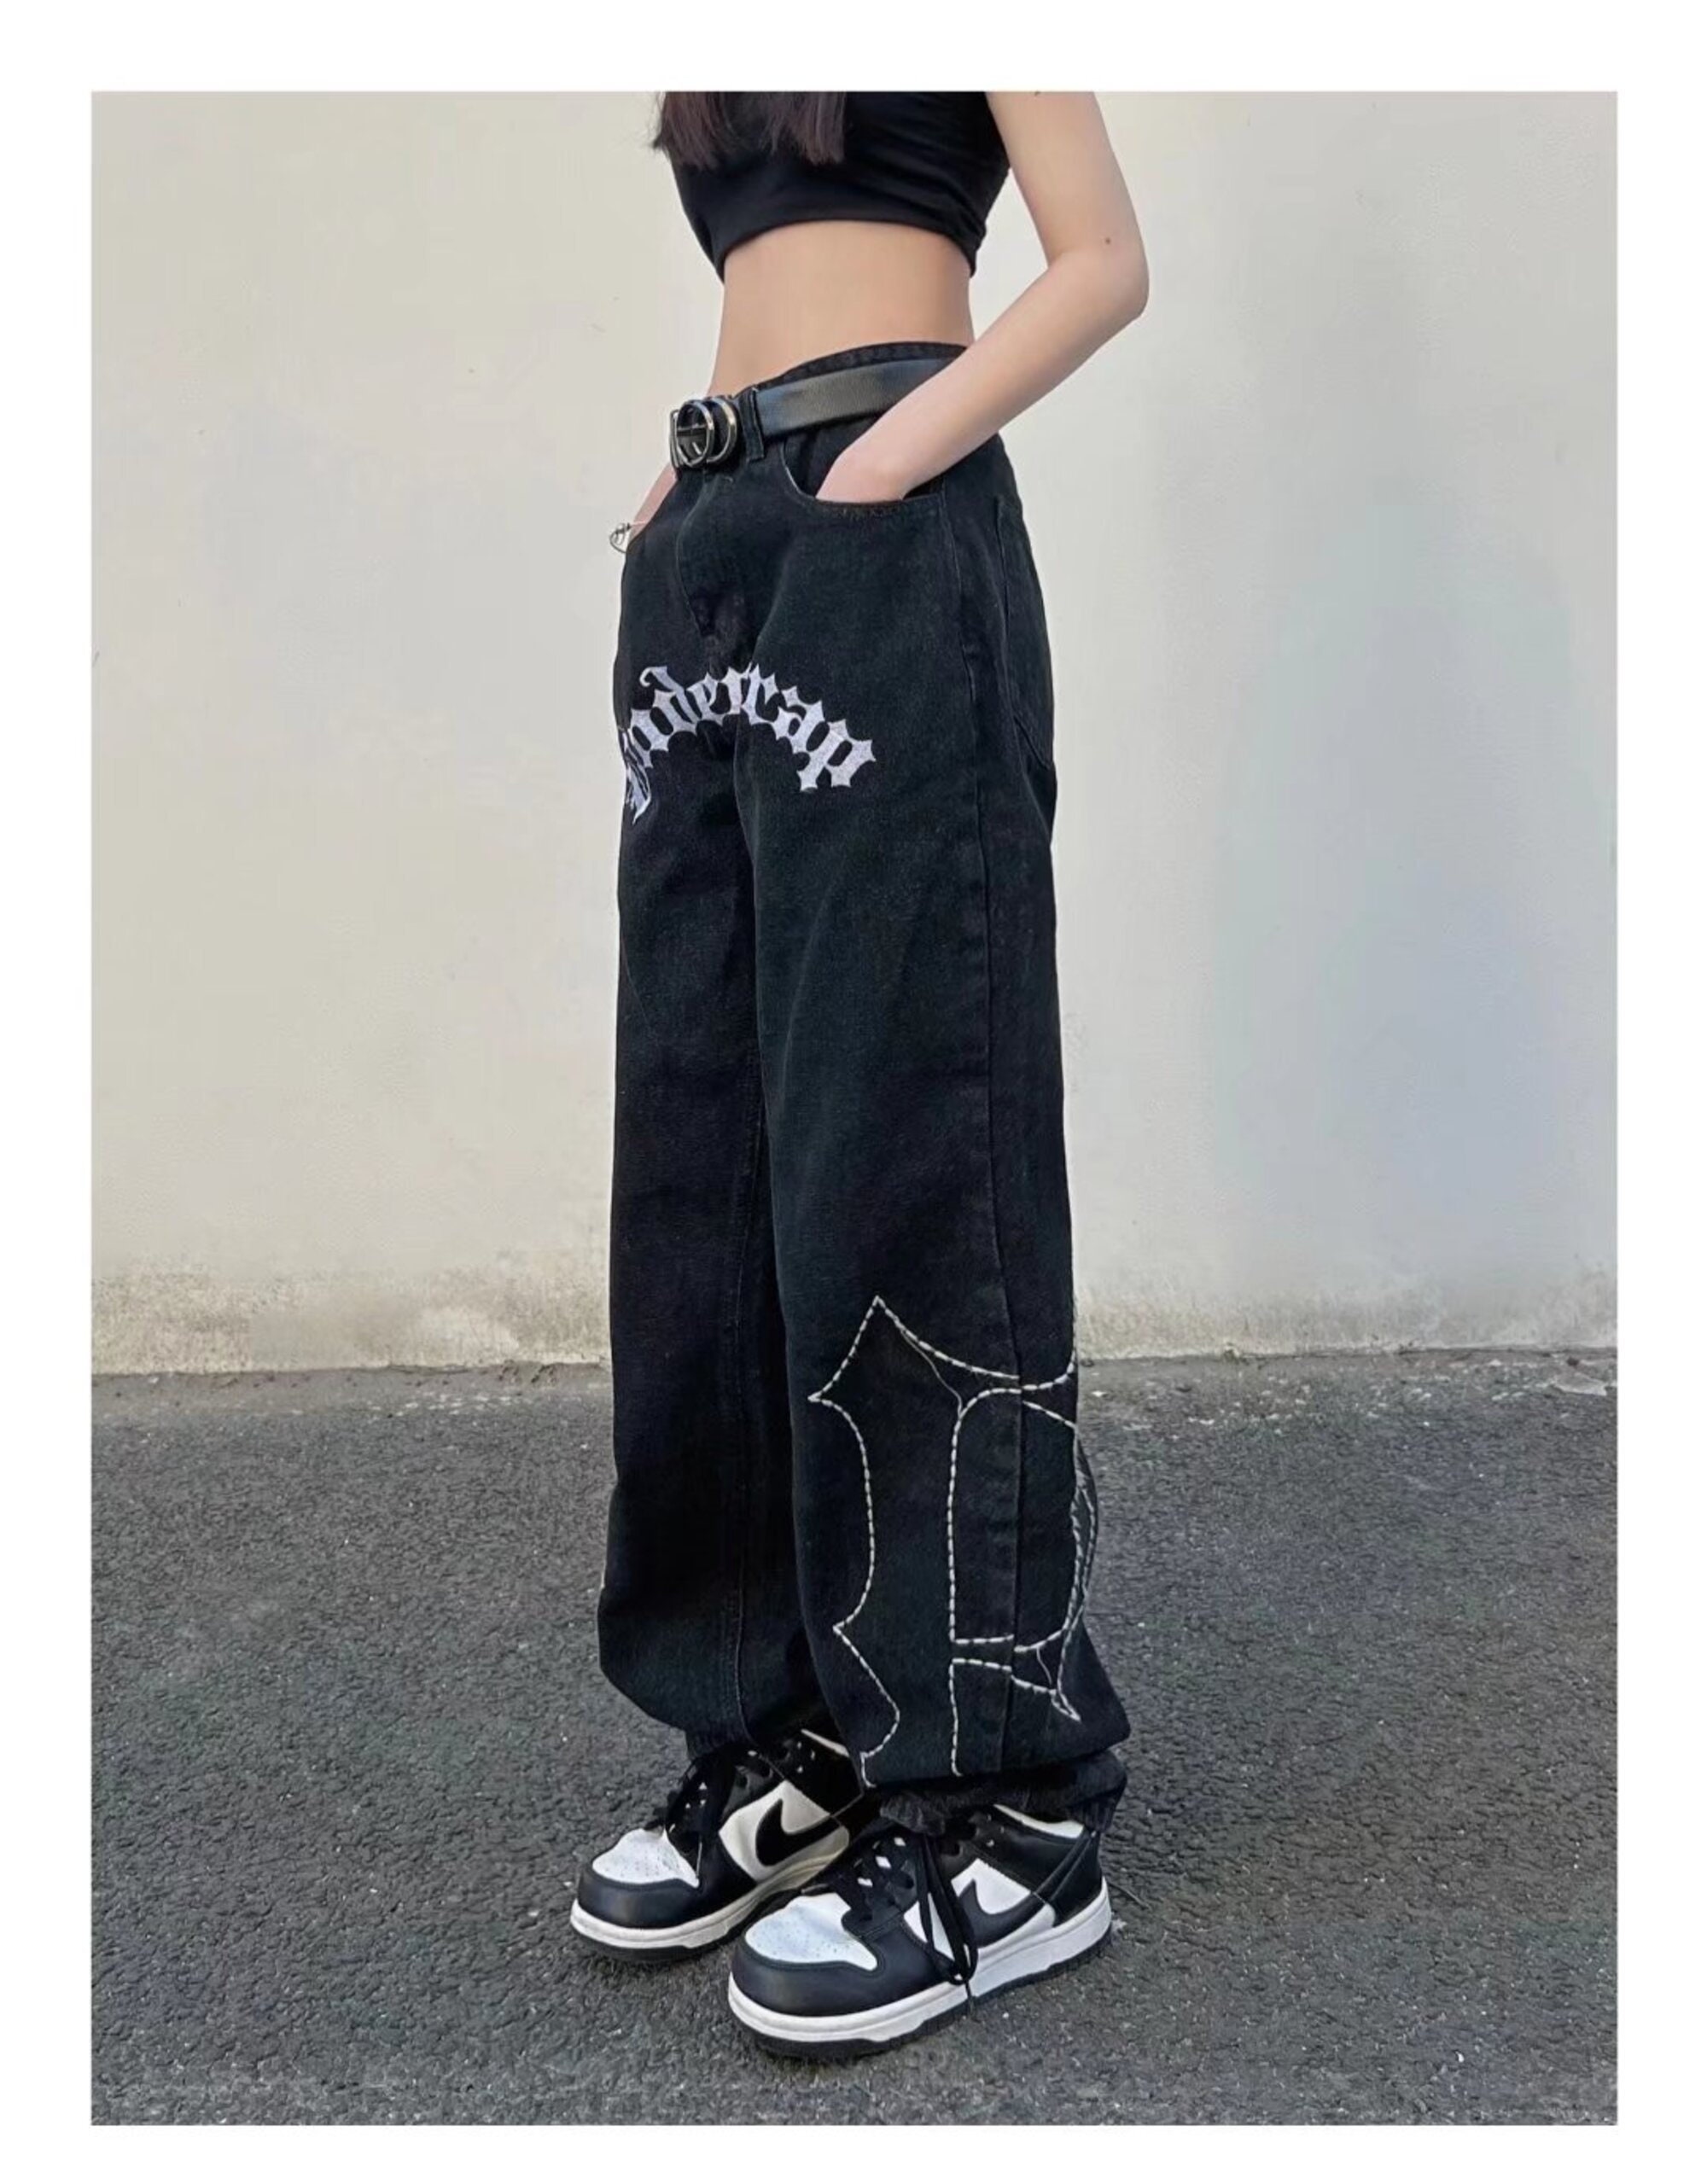 Dark Streetwear Letter Embroidery Black Baggy Men Straight Jeans Pants Y2k Clothes Casual Women Denim Trousers Ropa Hombre